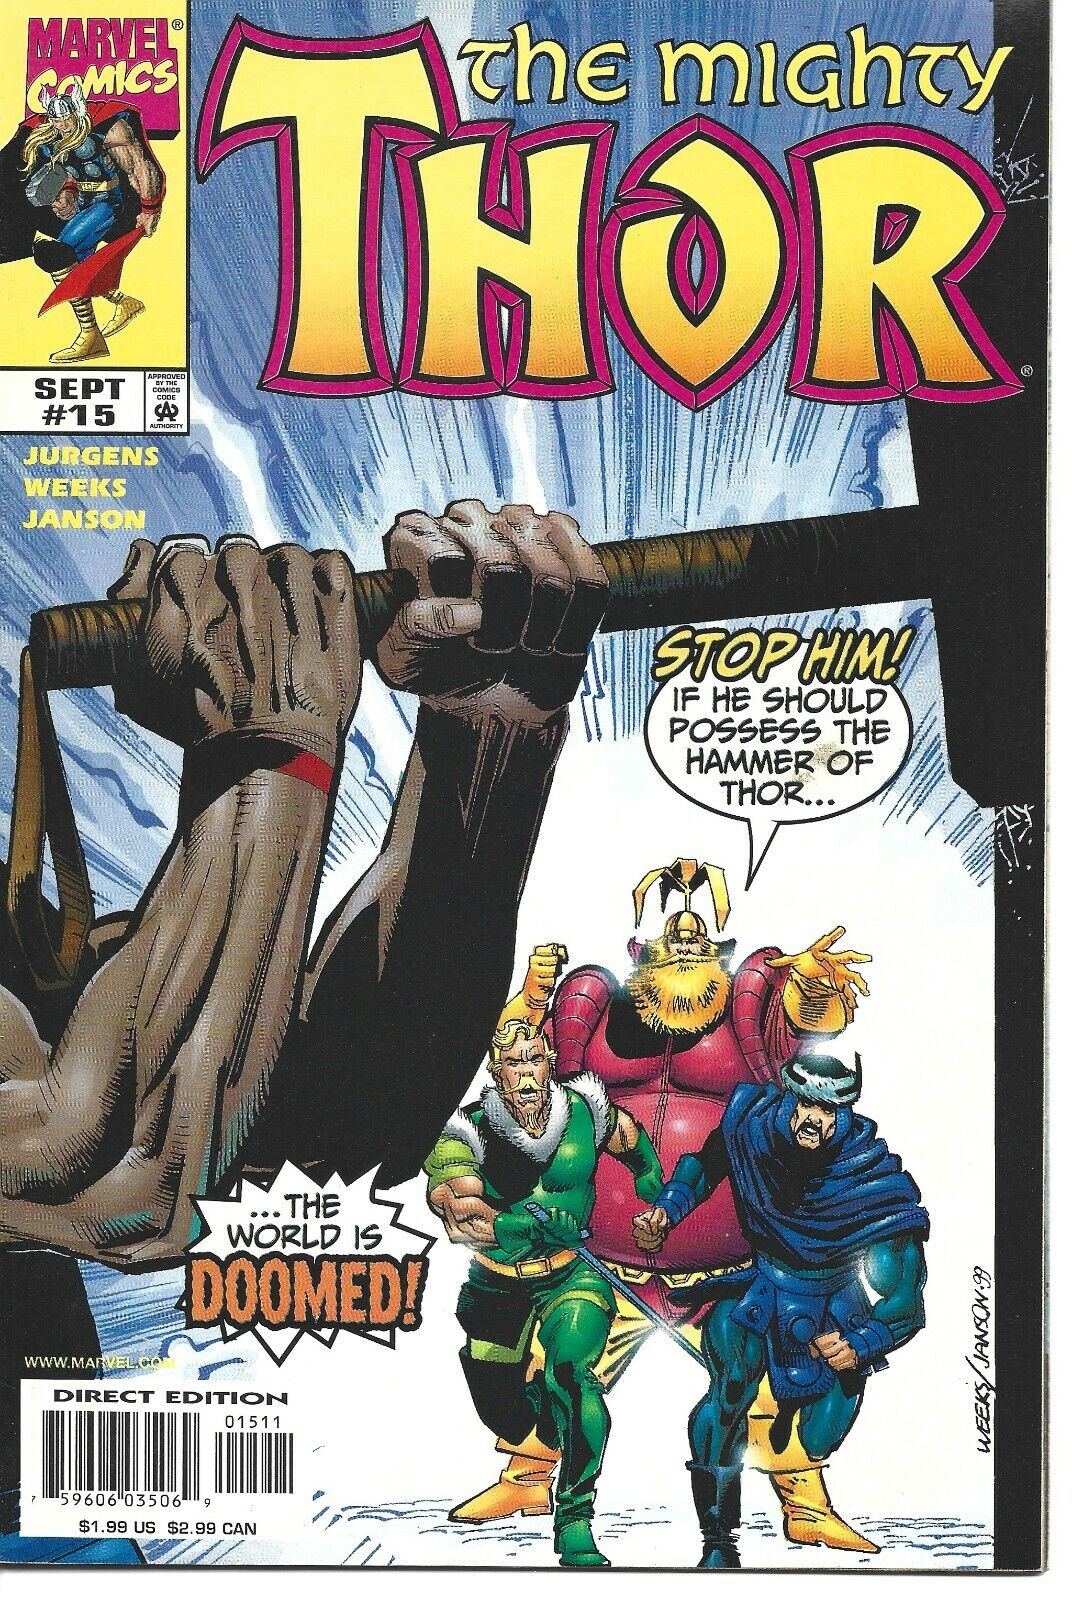 THE MIGHTY THOR #15 MARVEL COMICS 1999 BAGGED AND BOARDED